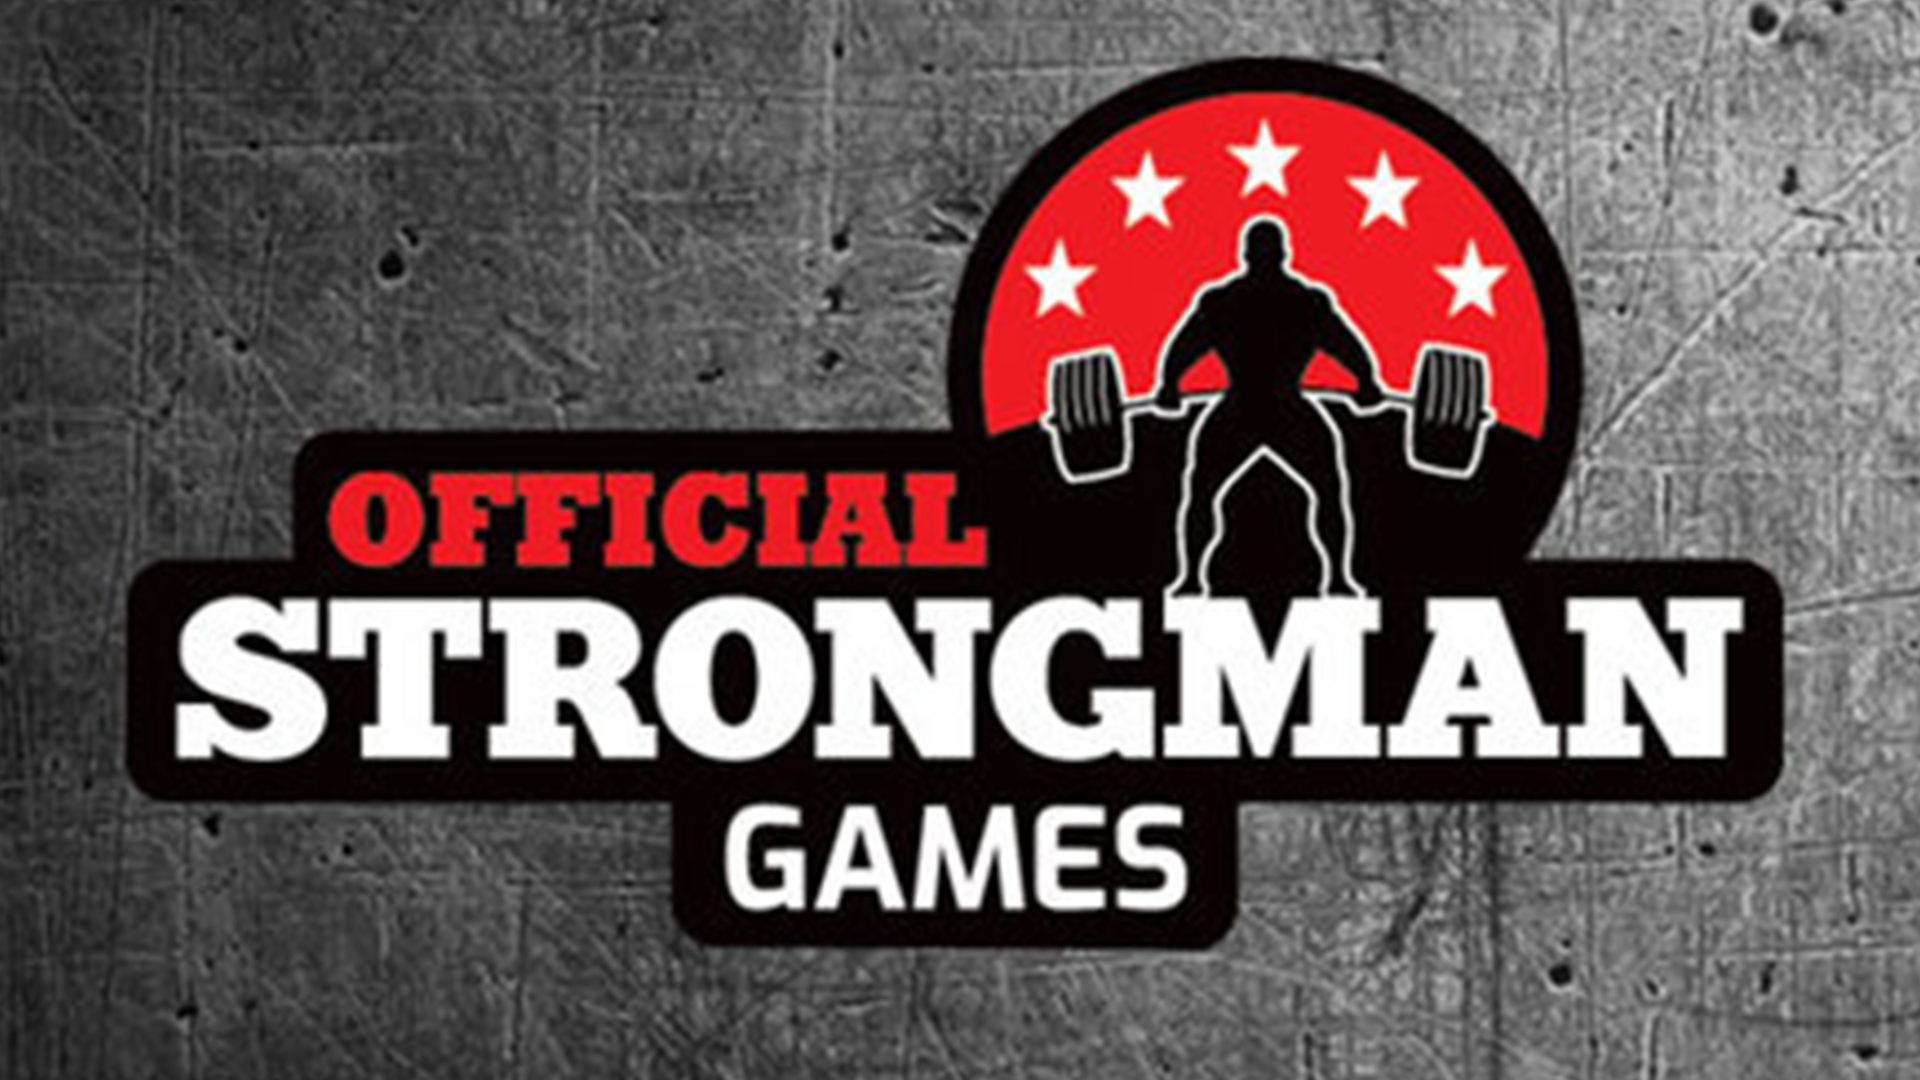 TUFFWRAPS SPONSORS THE OFFICIAL STRONGMAN GAMES